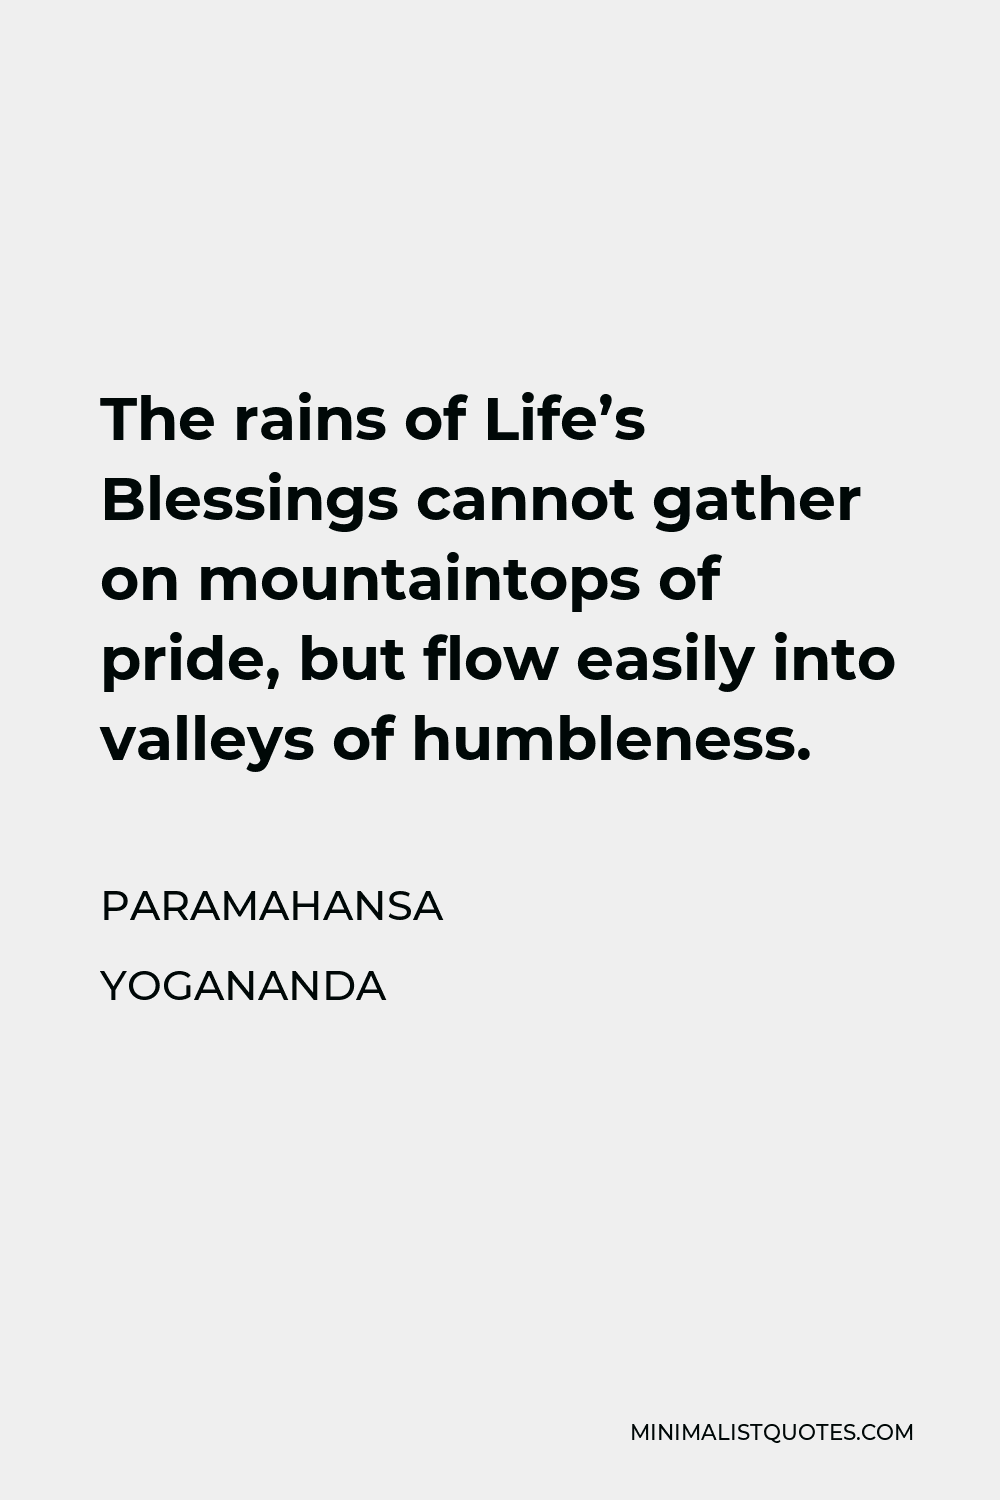 Paramahansa Yogananda Quote - The rains of Life’s Blessings cannot gather on mountaintops of pride, but flow easily into valleys of humbleness.